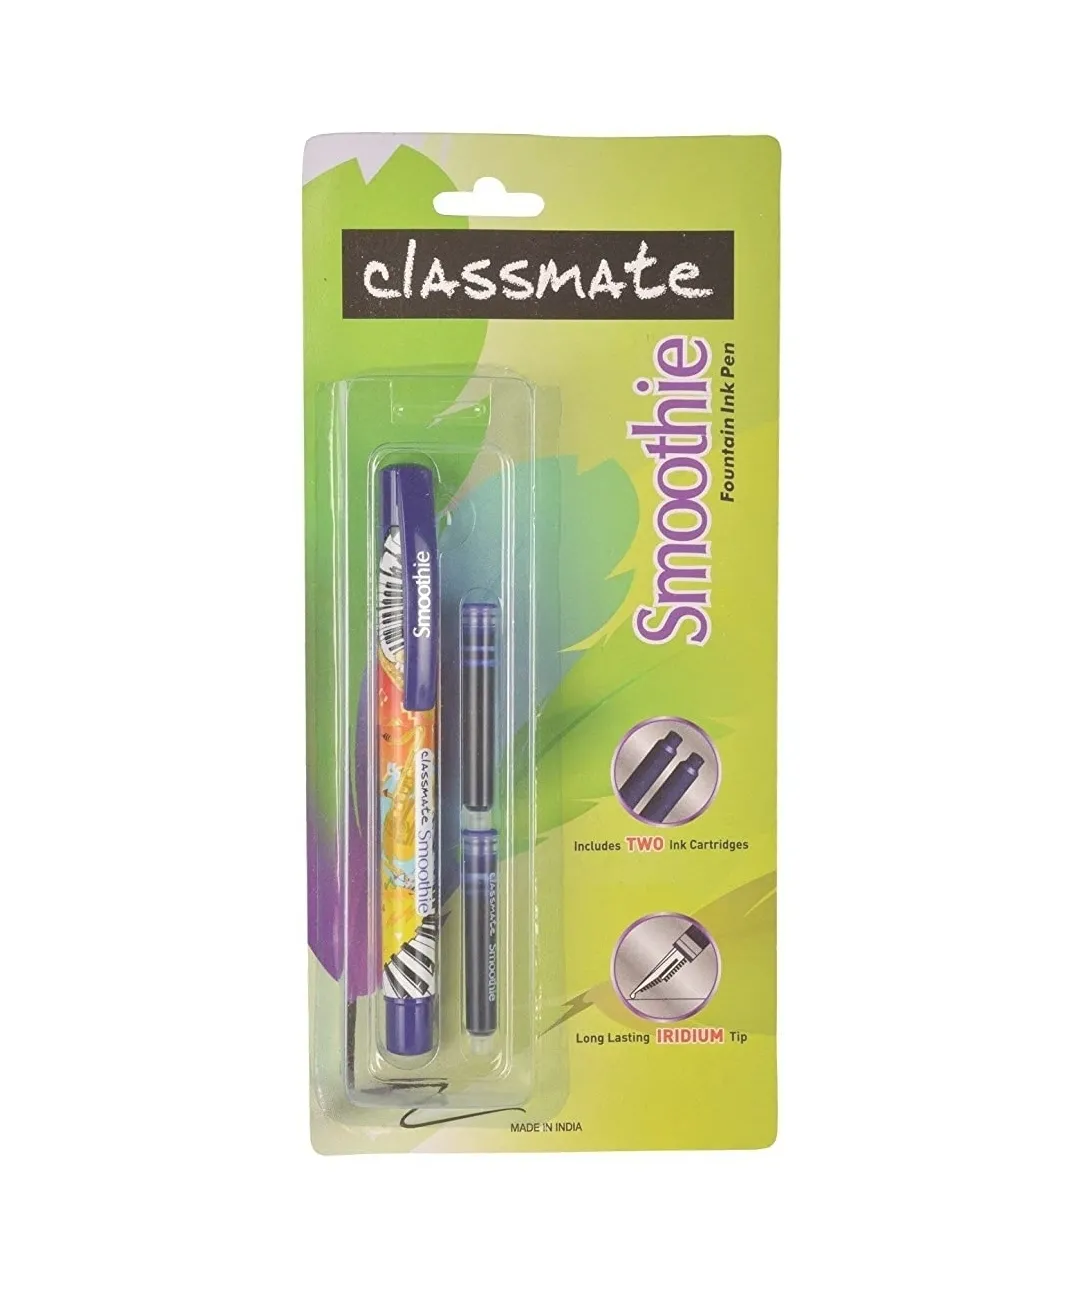 Classmate Smoothie Fountain Pen, 1s Blister Pack, Pack of 1